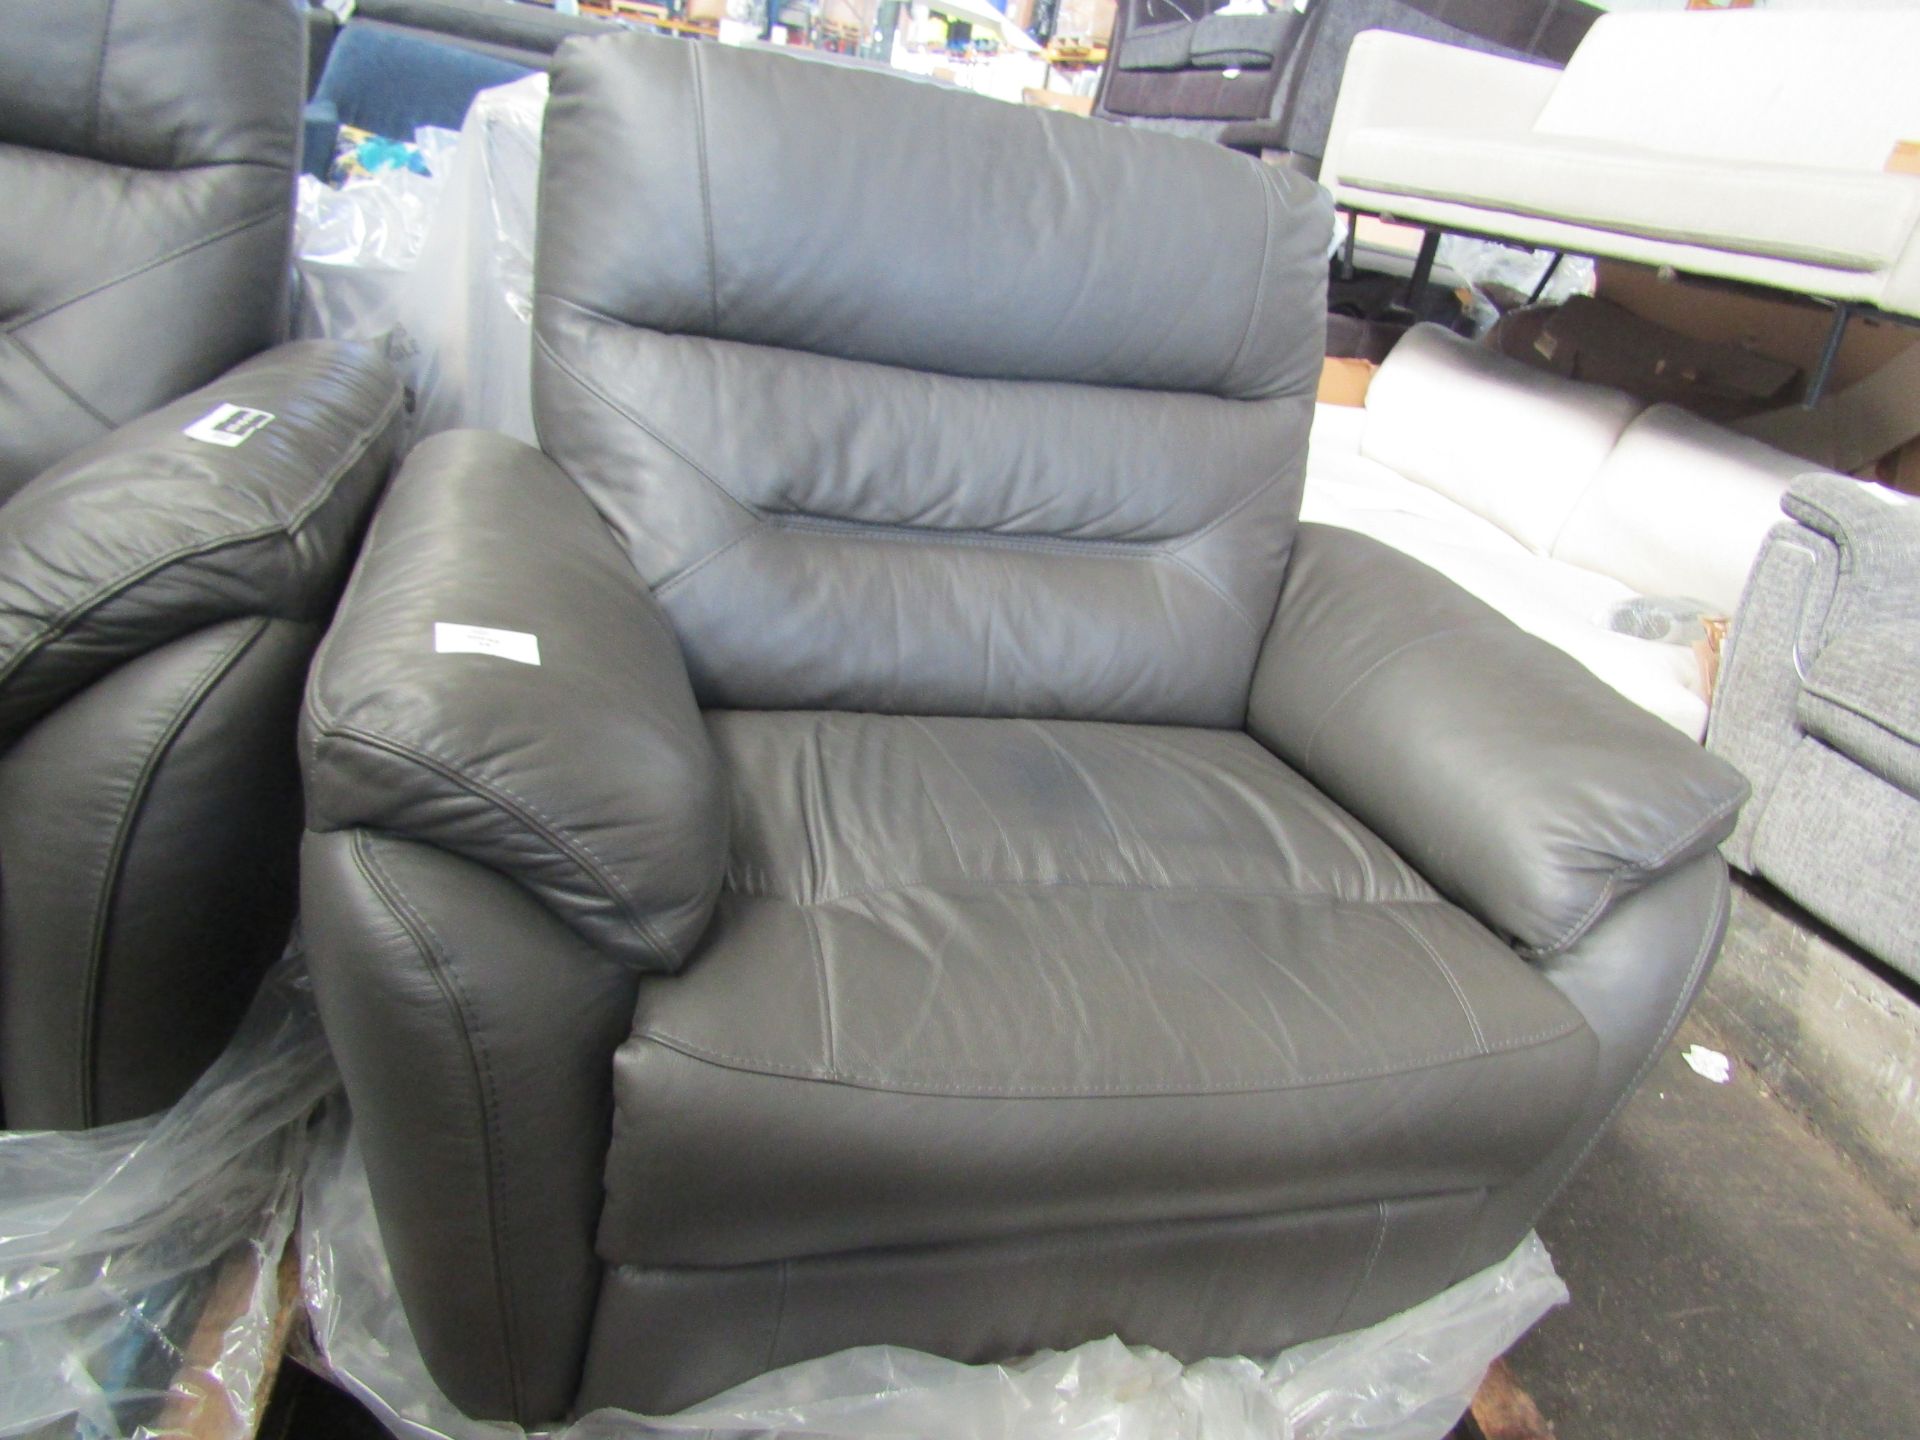 Rafa Xl Power Recliner Chair G10 D.Grey Self Piping Self Stitch Black Glides Amx01 RRP 796 The - Image 2 of 2